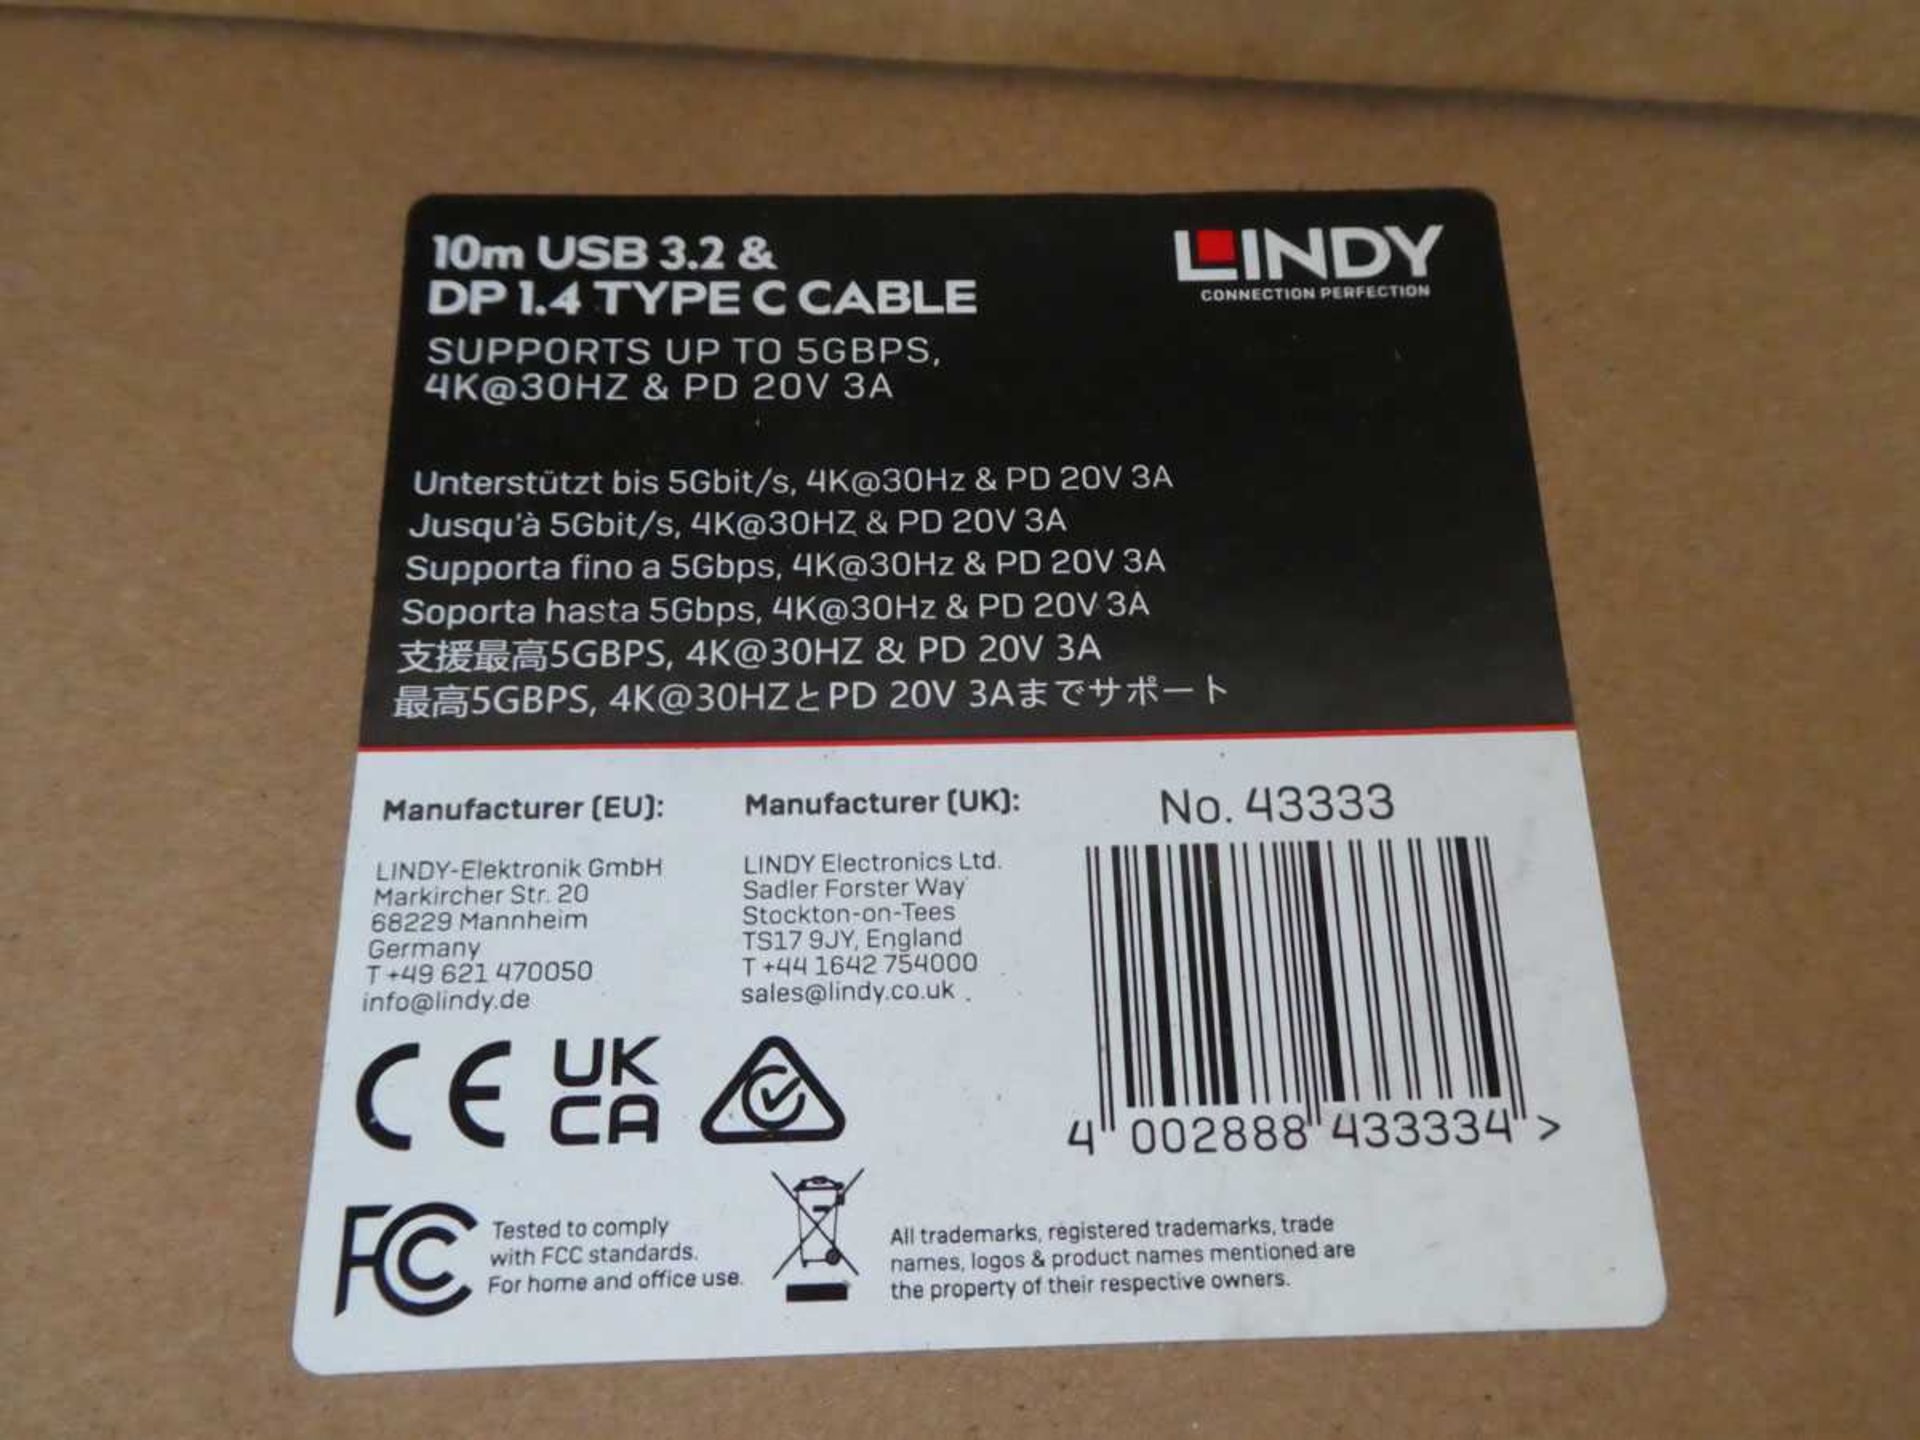 +VAT 2x Boxed Lindy cables, 1x USB 3.0 active optical cable 30m, and 1x 10m USB 3.2 and DP 1.4 - Bild 2 aus 3